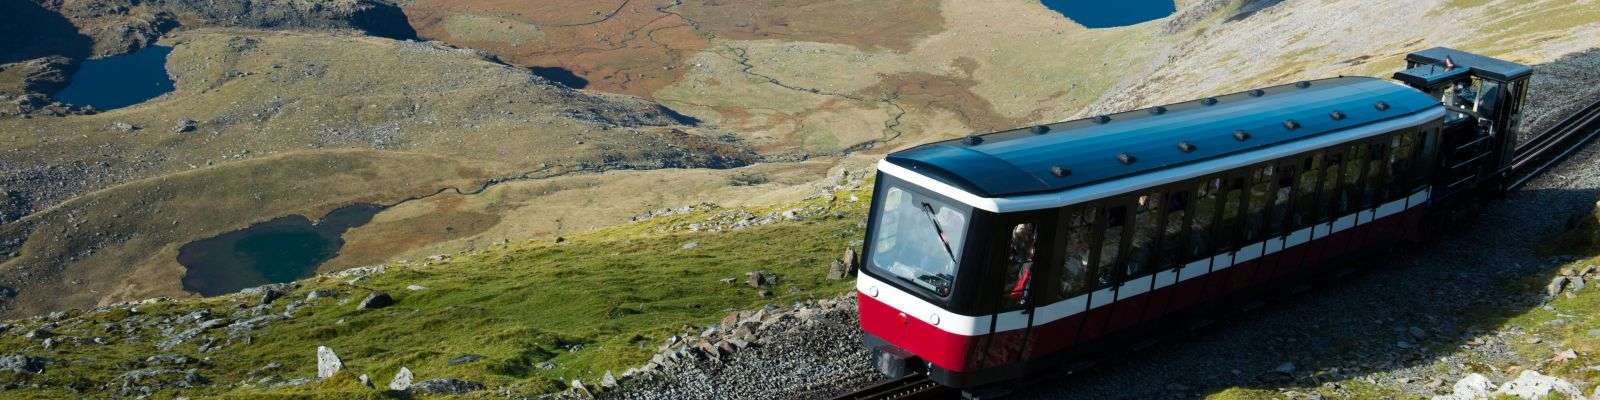 Holiday Cottages In Snowdonia To Rent Self Catering Snowdonia